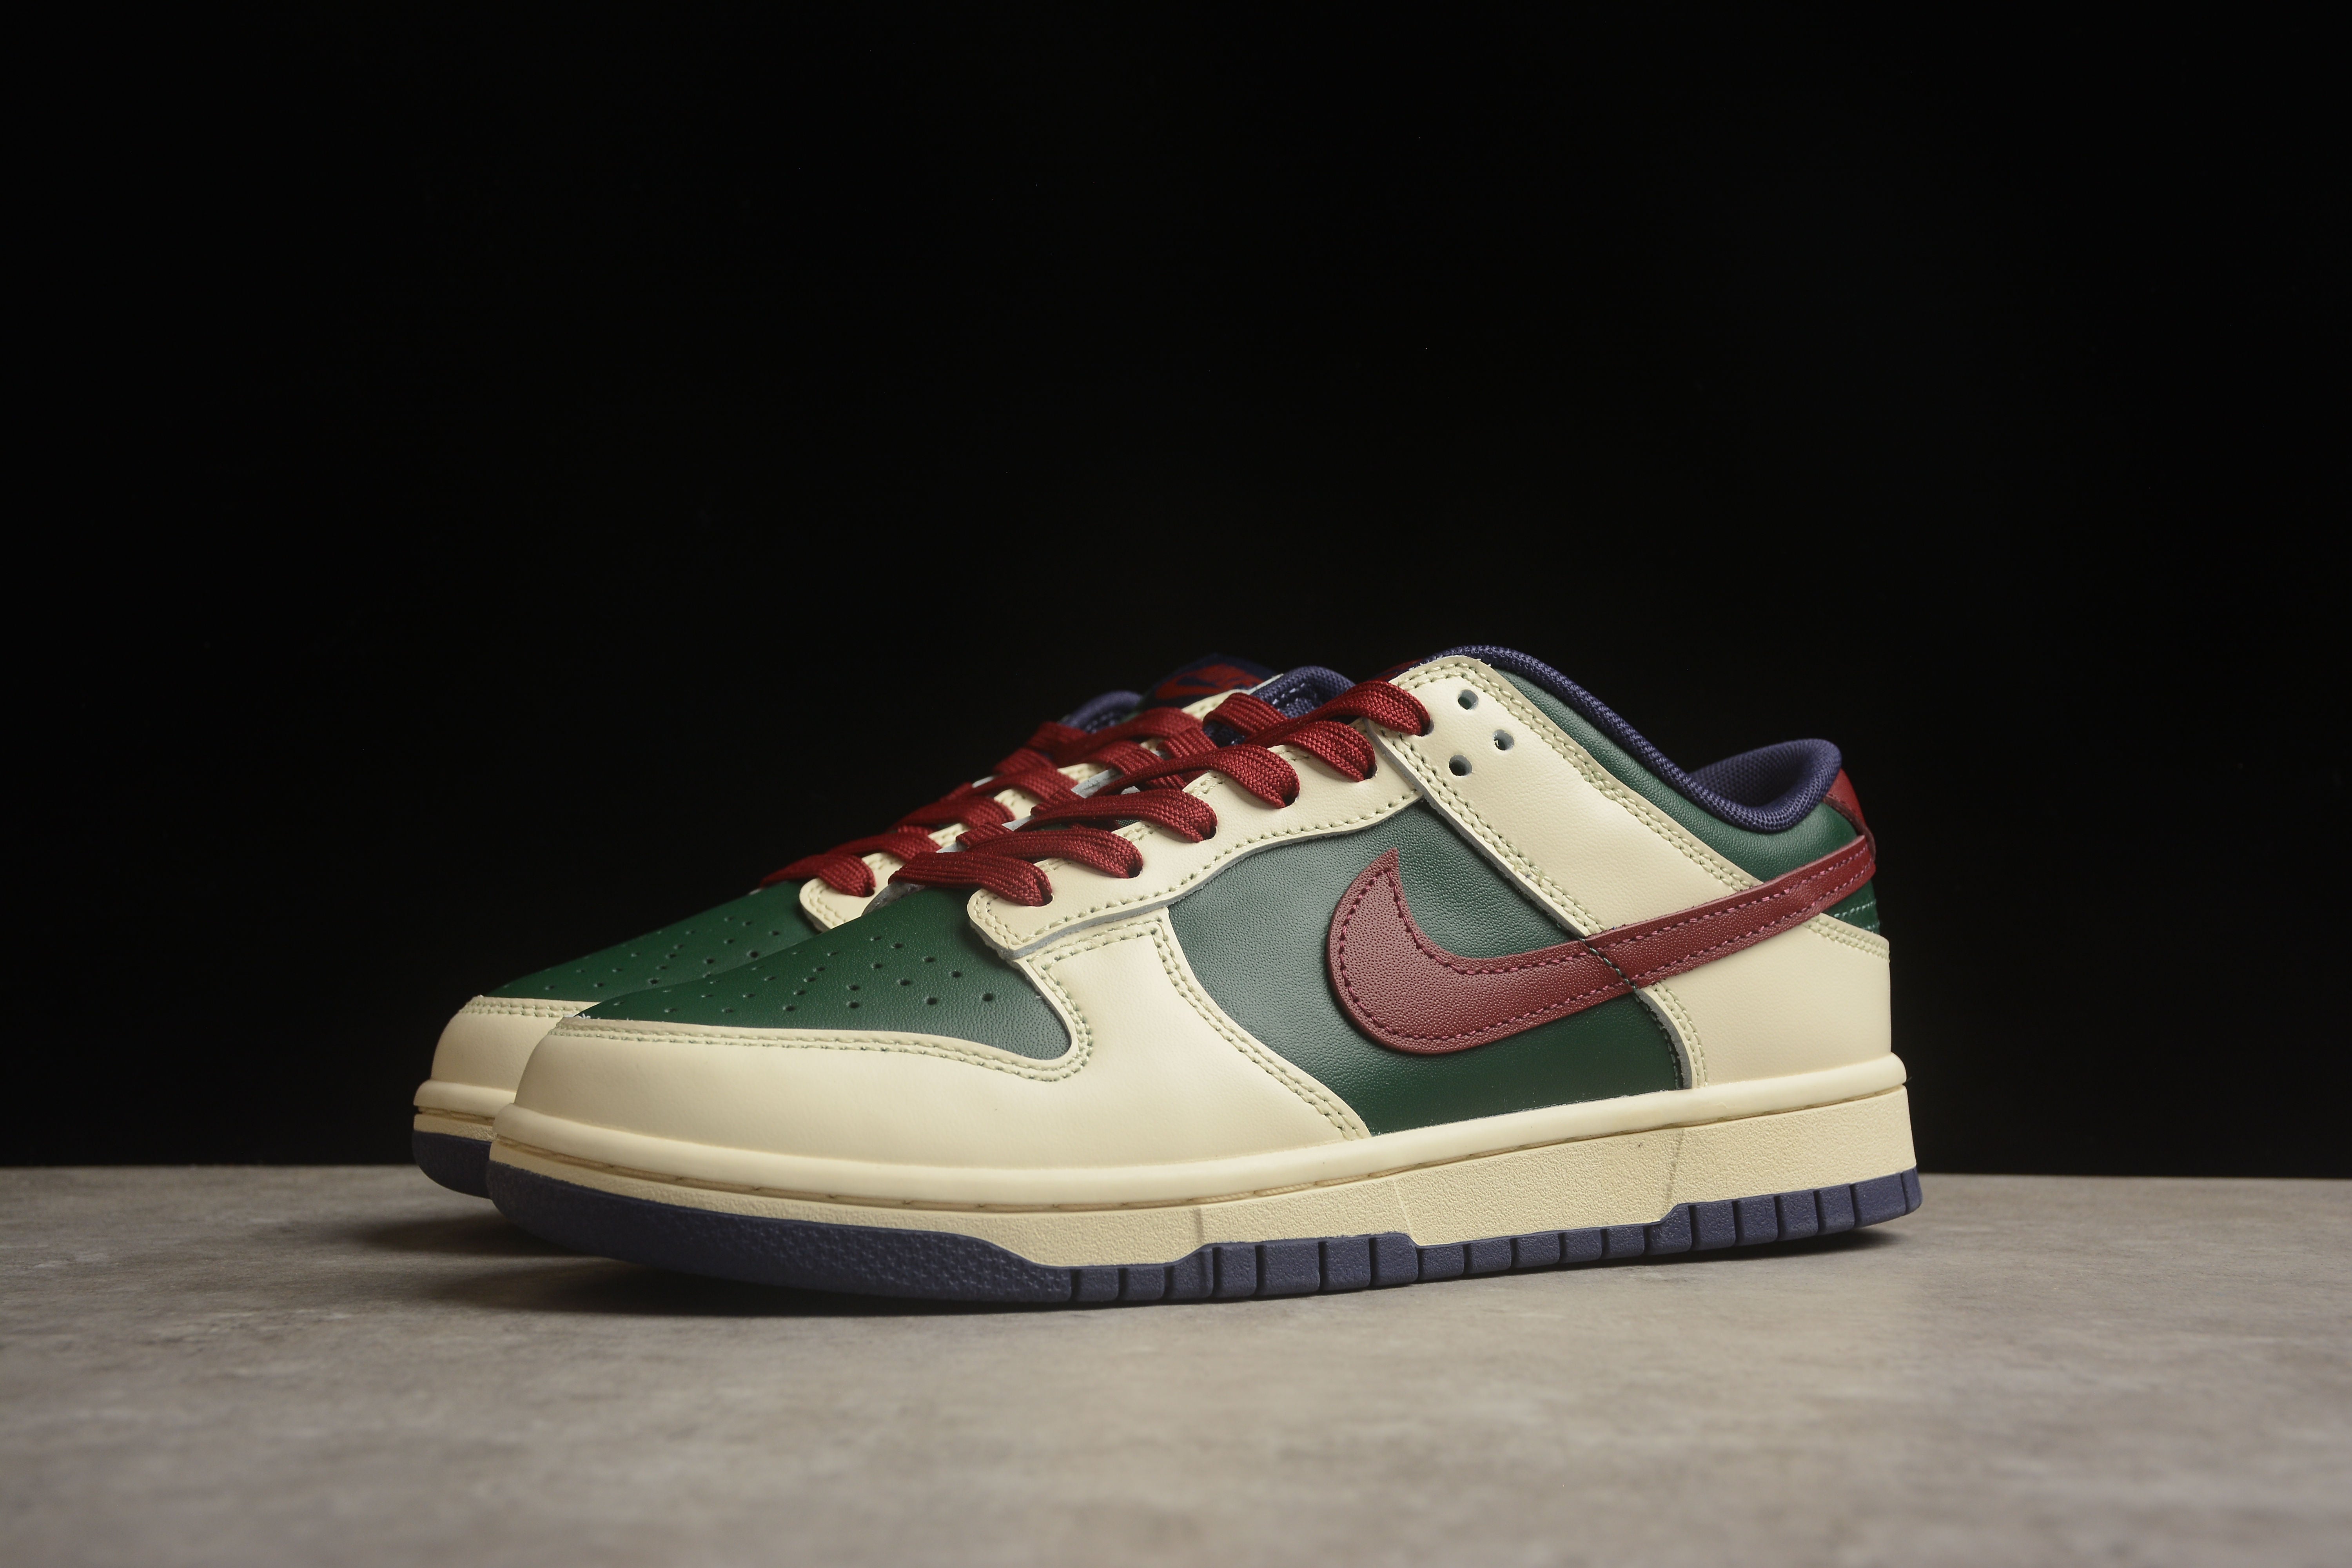 Nike SB dunk low olive red blue shoes